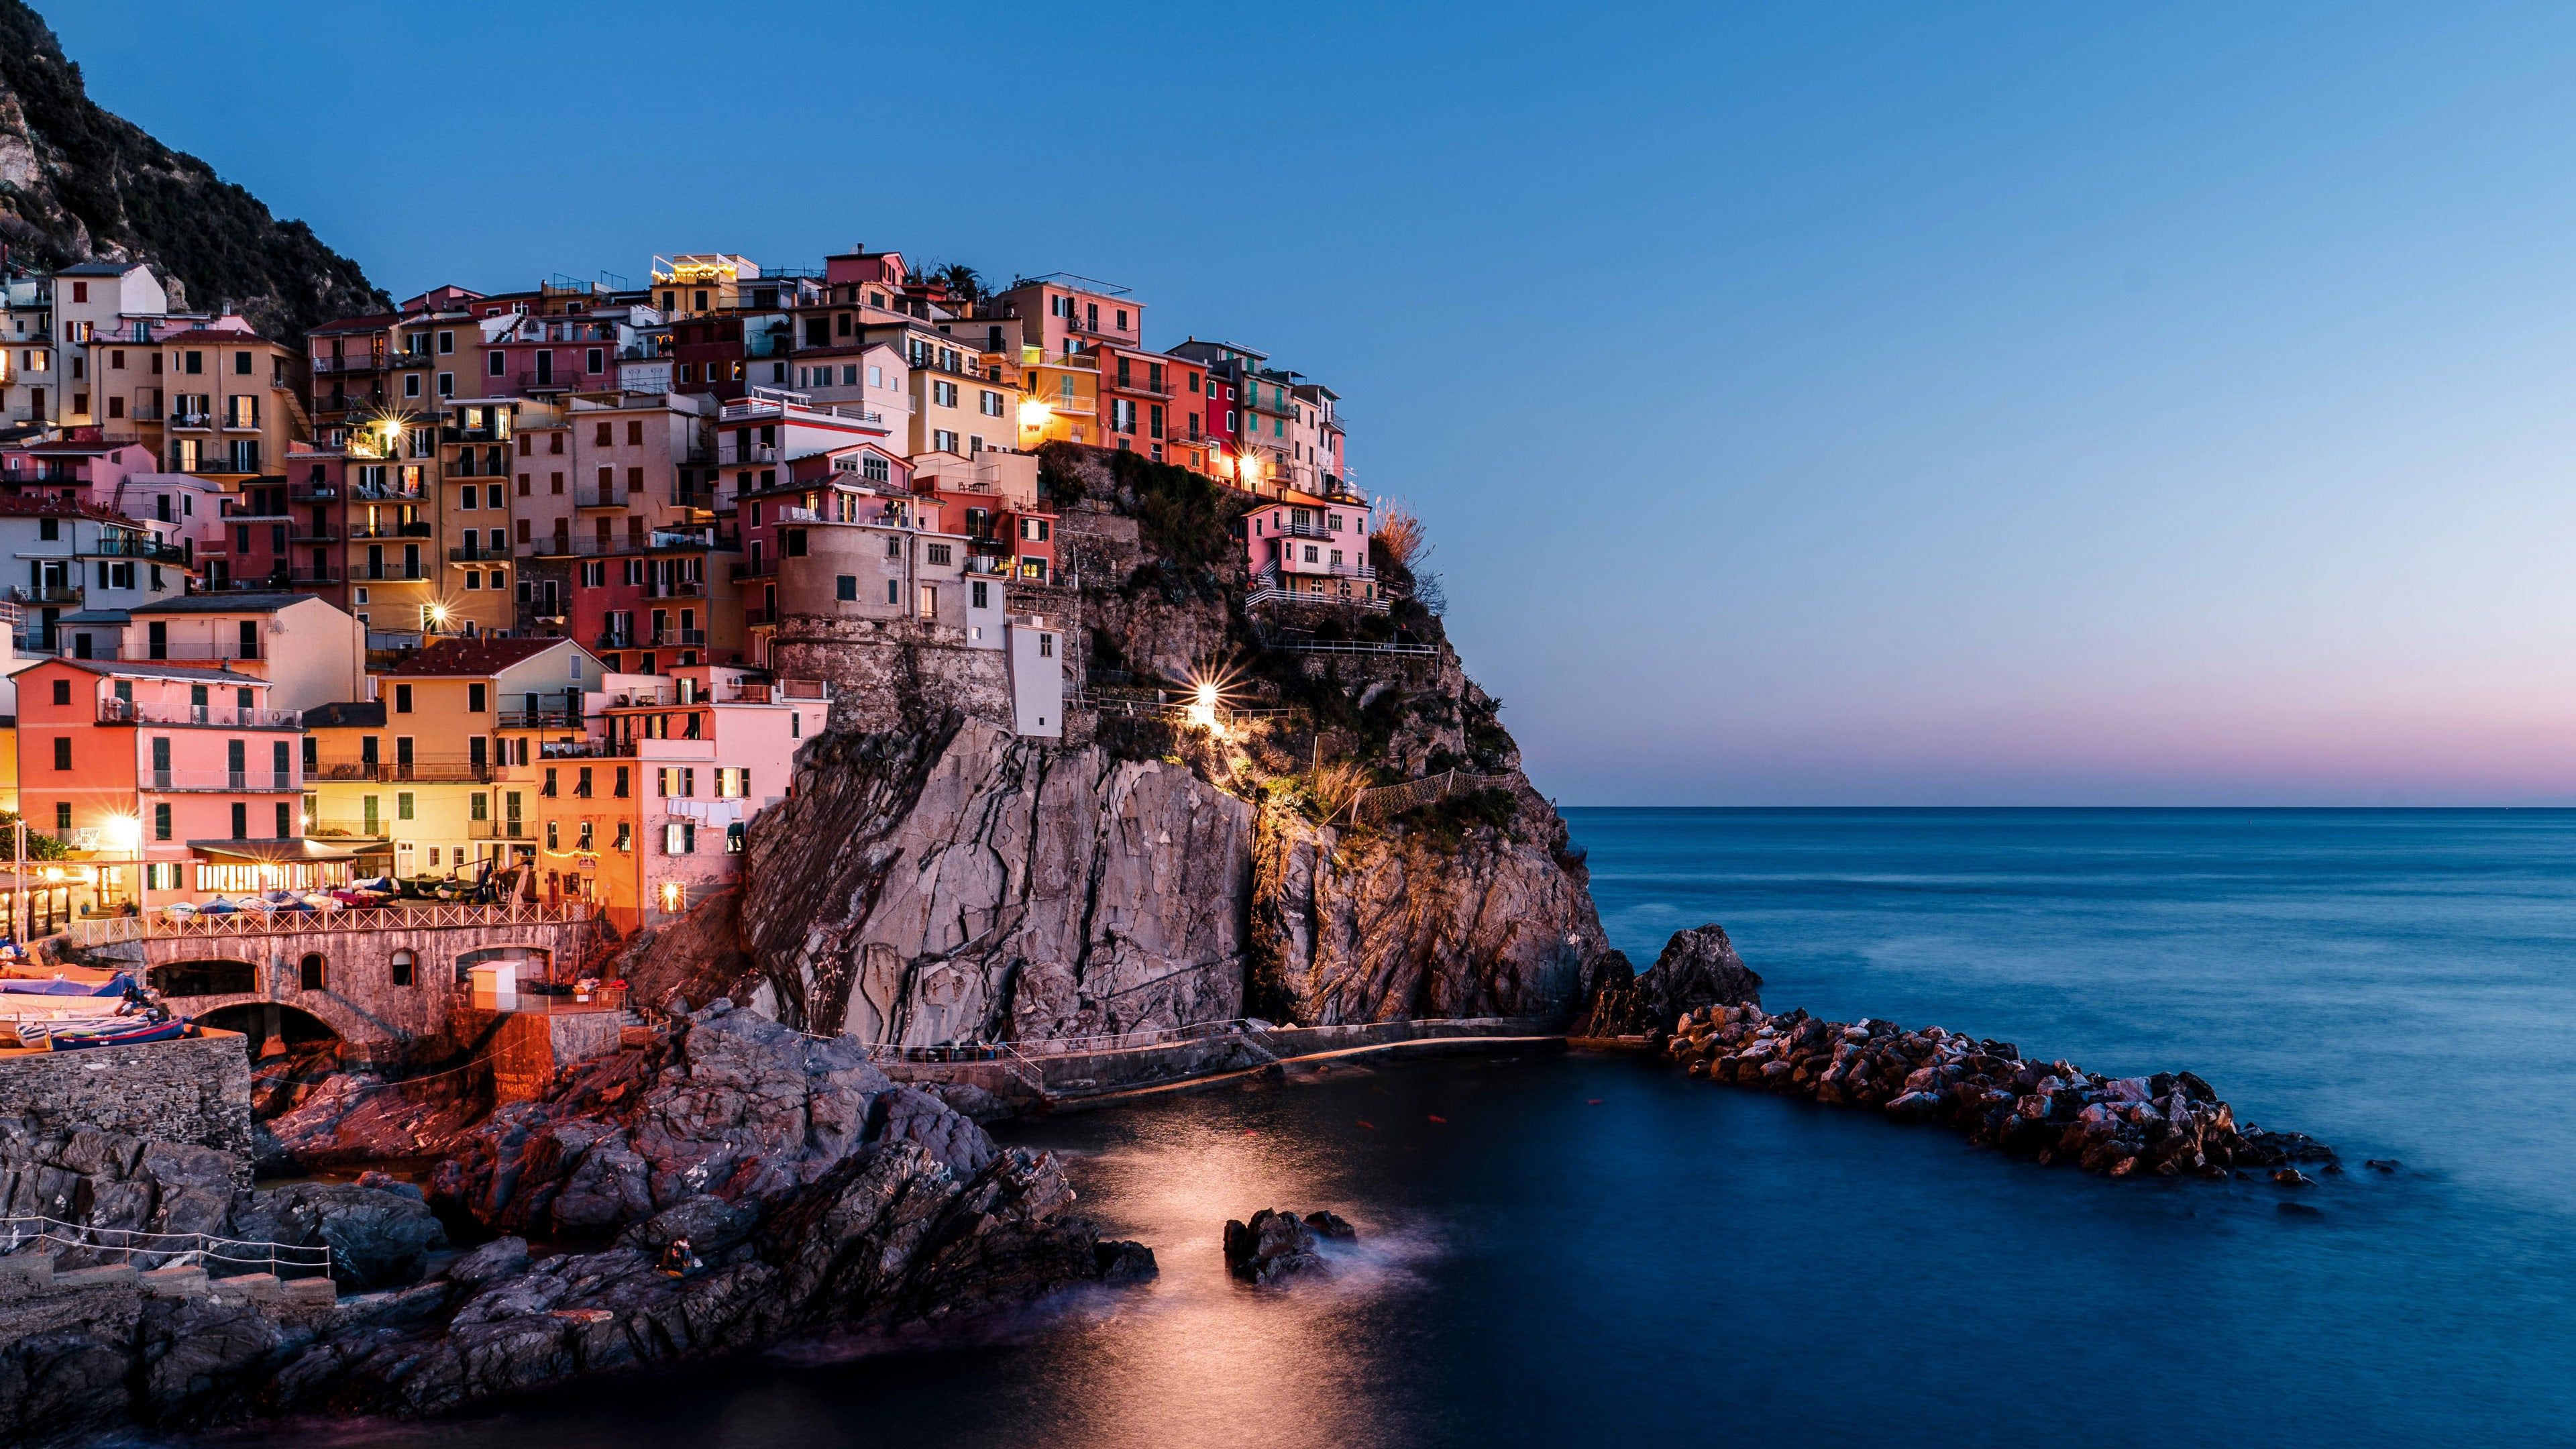 of Italy 4K wallpaper for your desktop or mobile screen